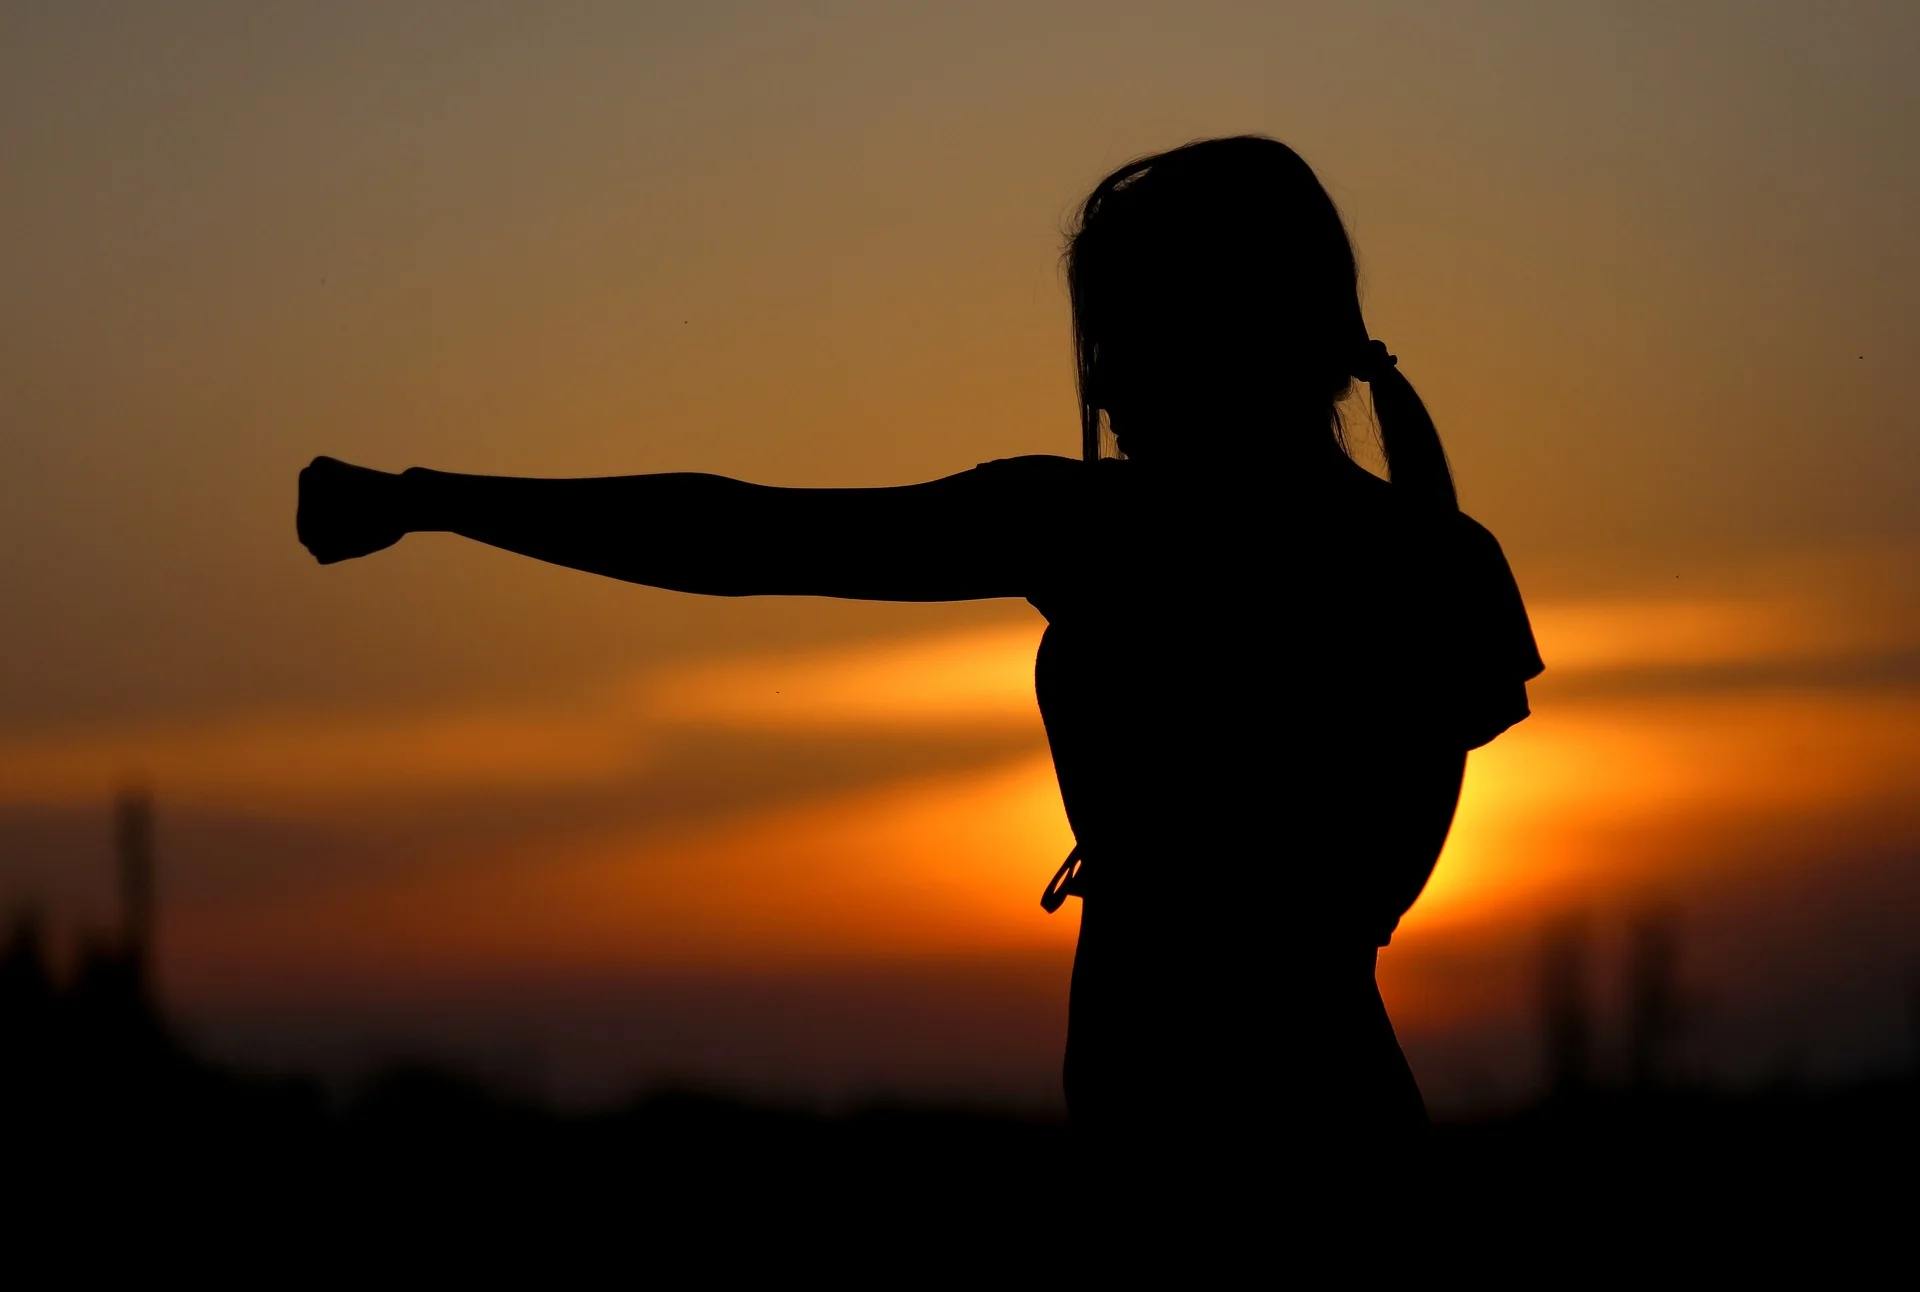 Silhouette of woman punching the air